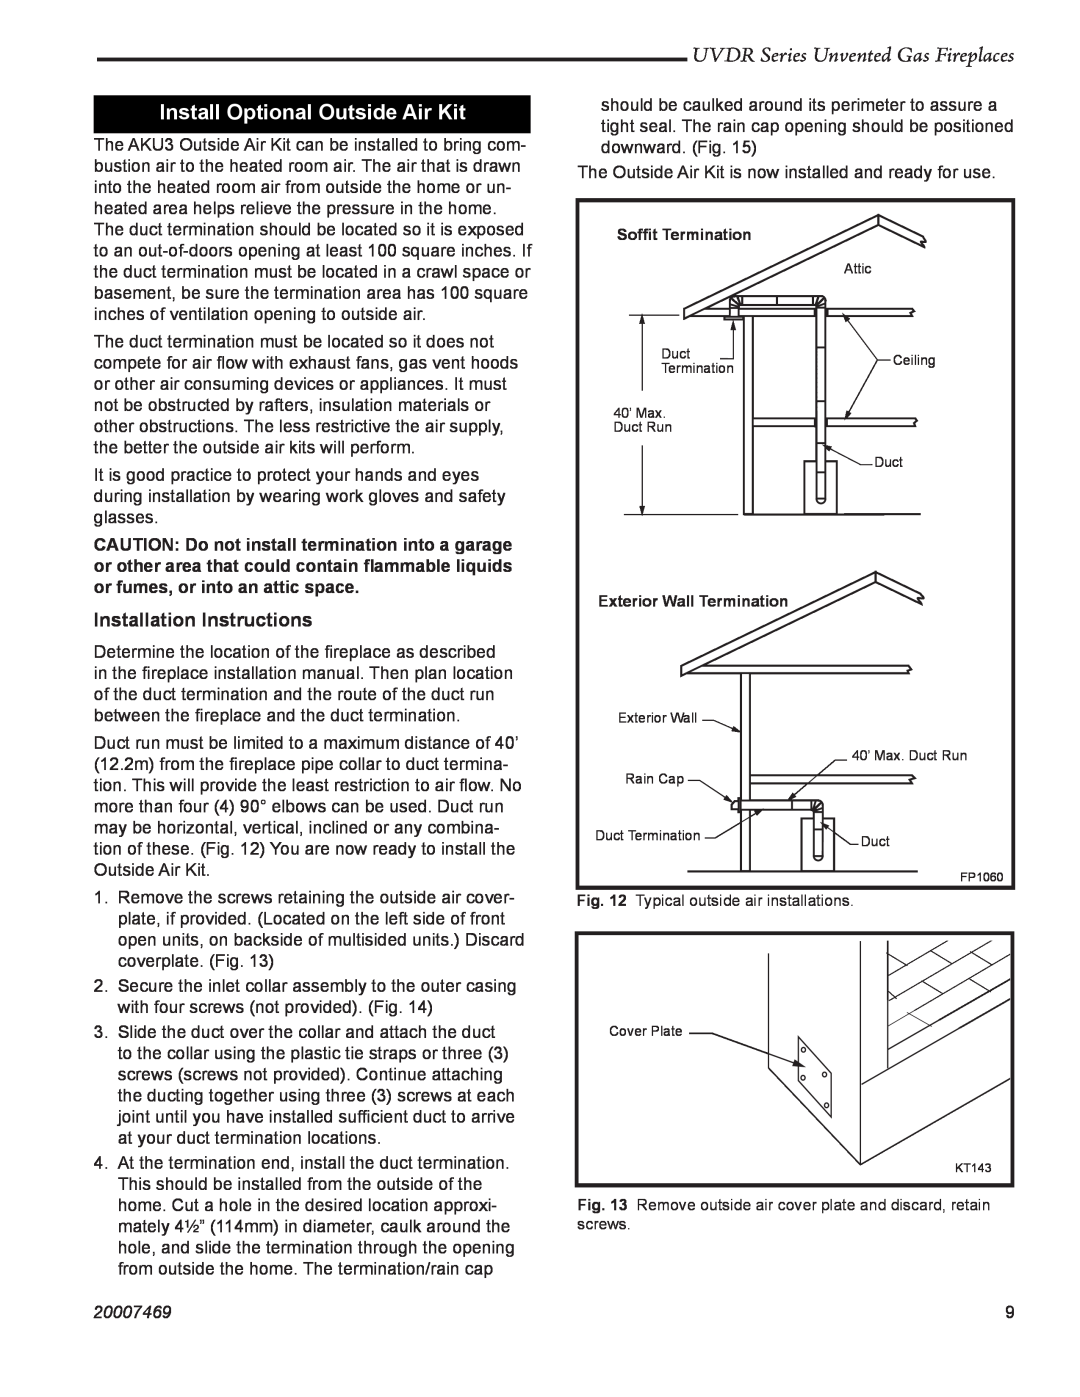 CFM Corporation UVDR36C Install Optional Outside Air Kit, Installation Instructions, UVDR Series Unvented Gas Fireplaces 